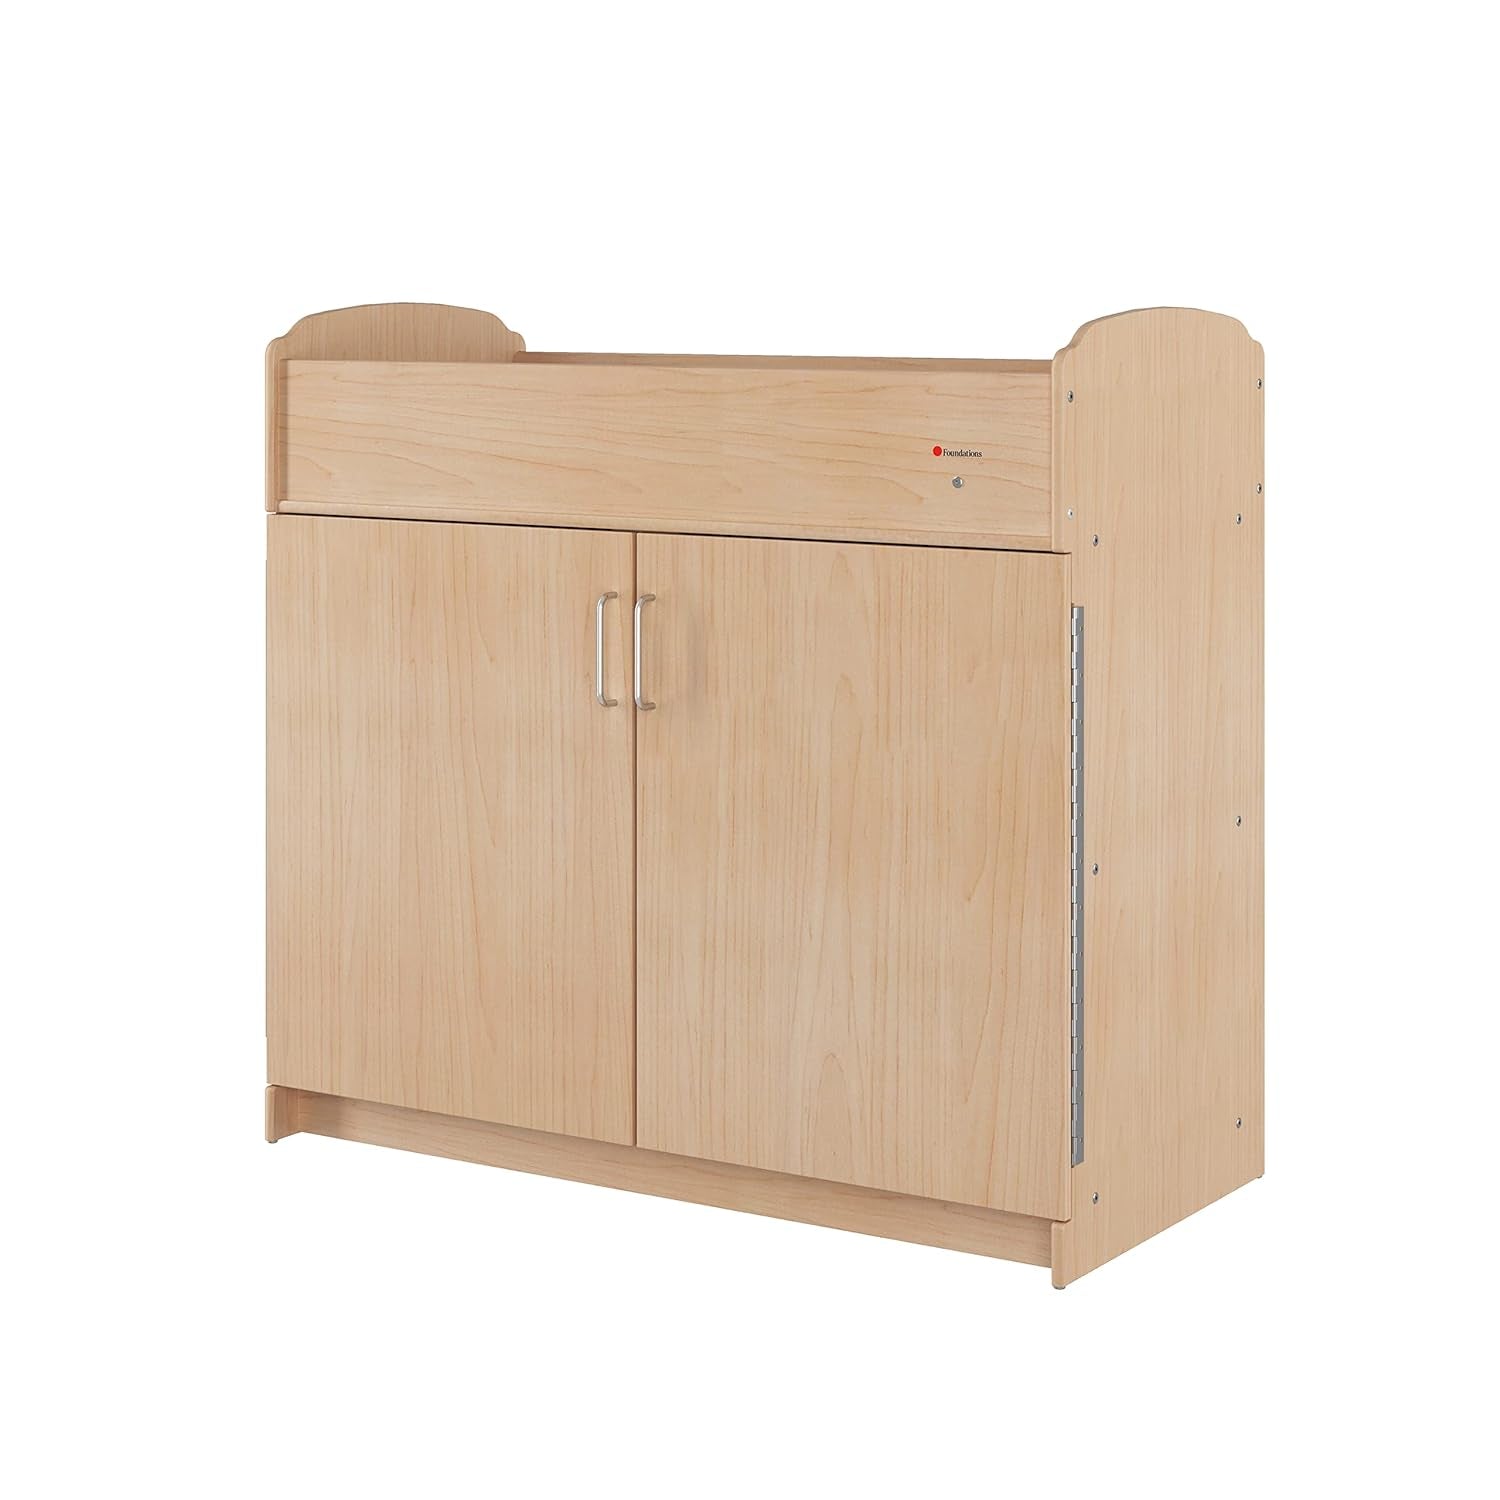 Serenity Daycare Changing Table with Storage Cubbies, Durable Wood Construction, Built-In Shelving for Ample Storage, Adjustable Safety Strap, Includes 1” Foam Mattress Pad (Natural)